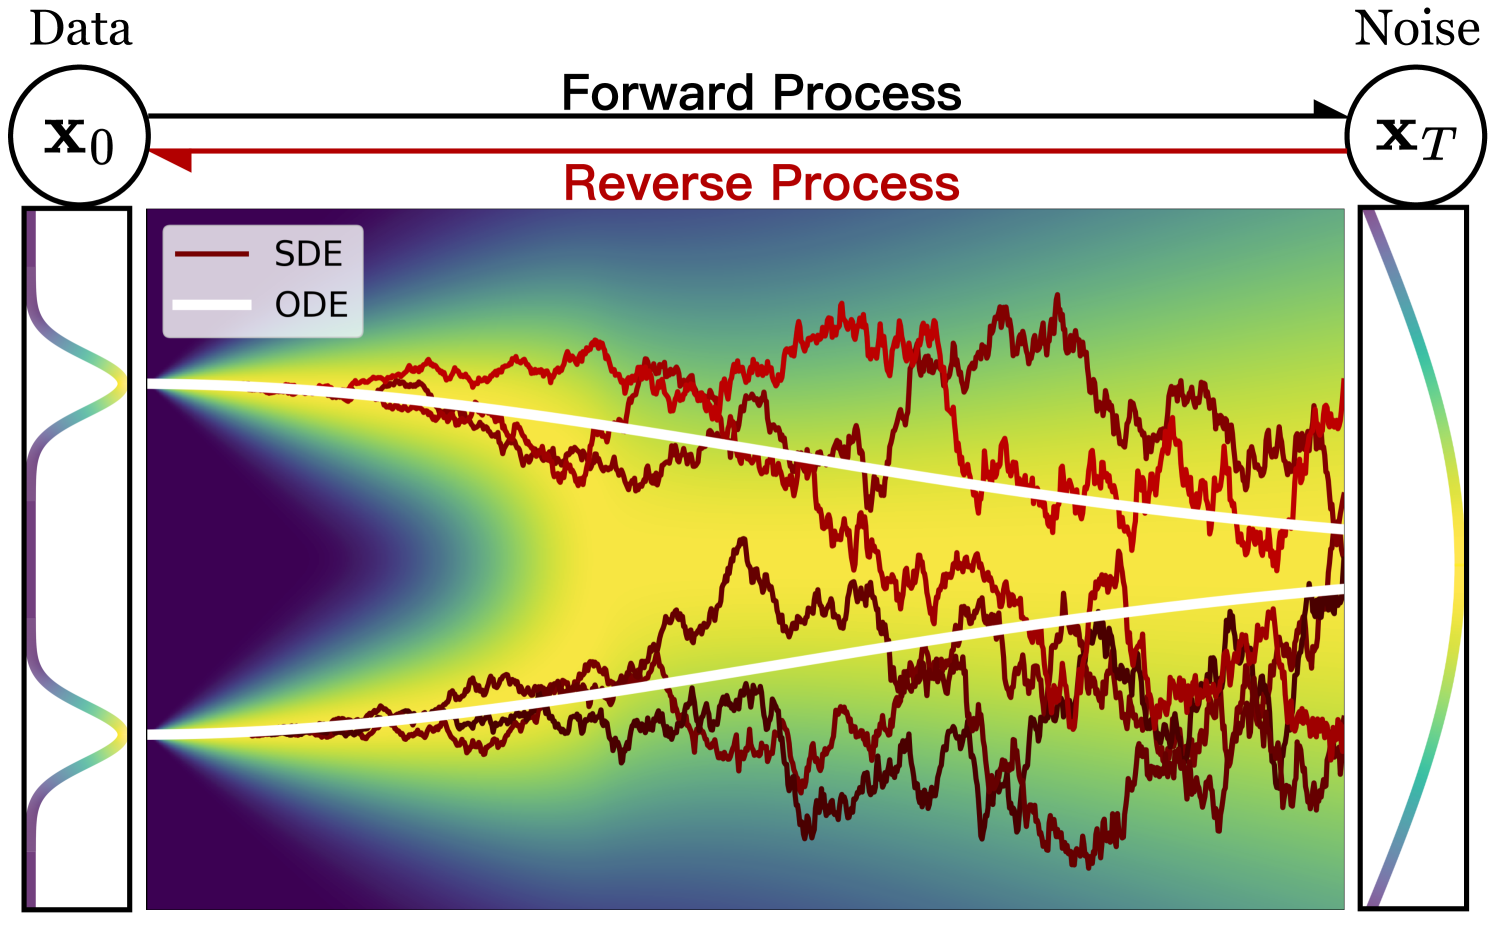 Comparison of reverse SDE and ODE trajectories in diffusion sampling